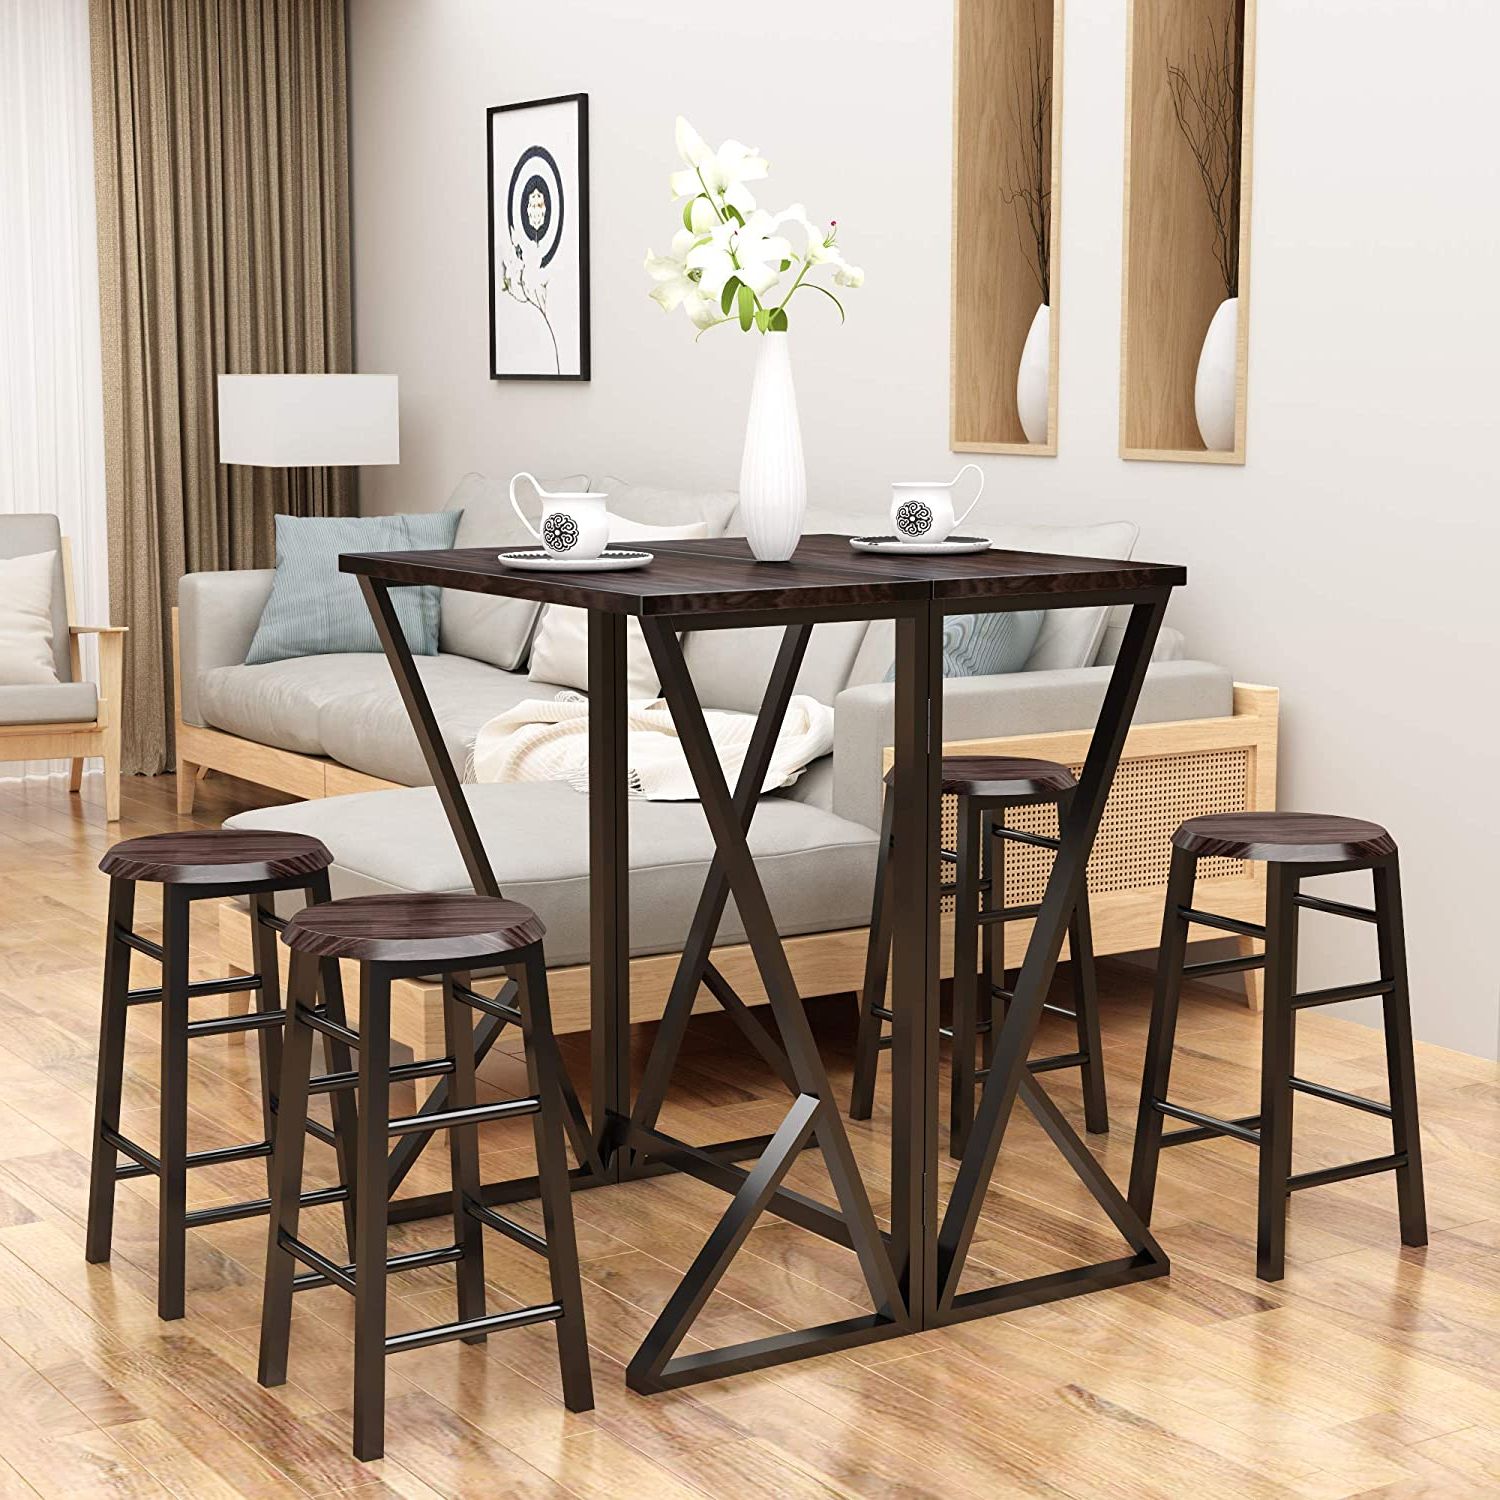 Most Recent 5 Piece Coffee Tables For 5 Piece Pub Dining Set Drop Leaf Folding Bar Height Kitchen Table With (View 7 of 10)